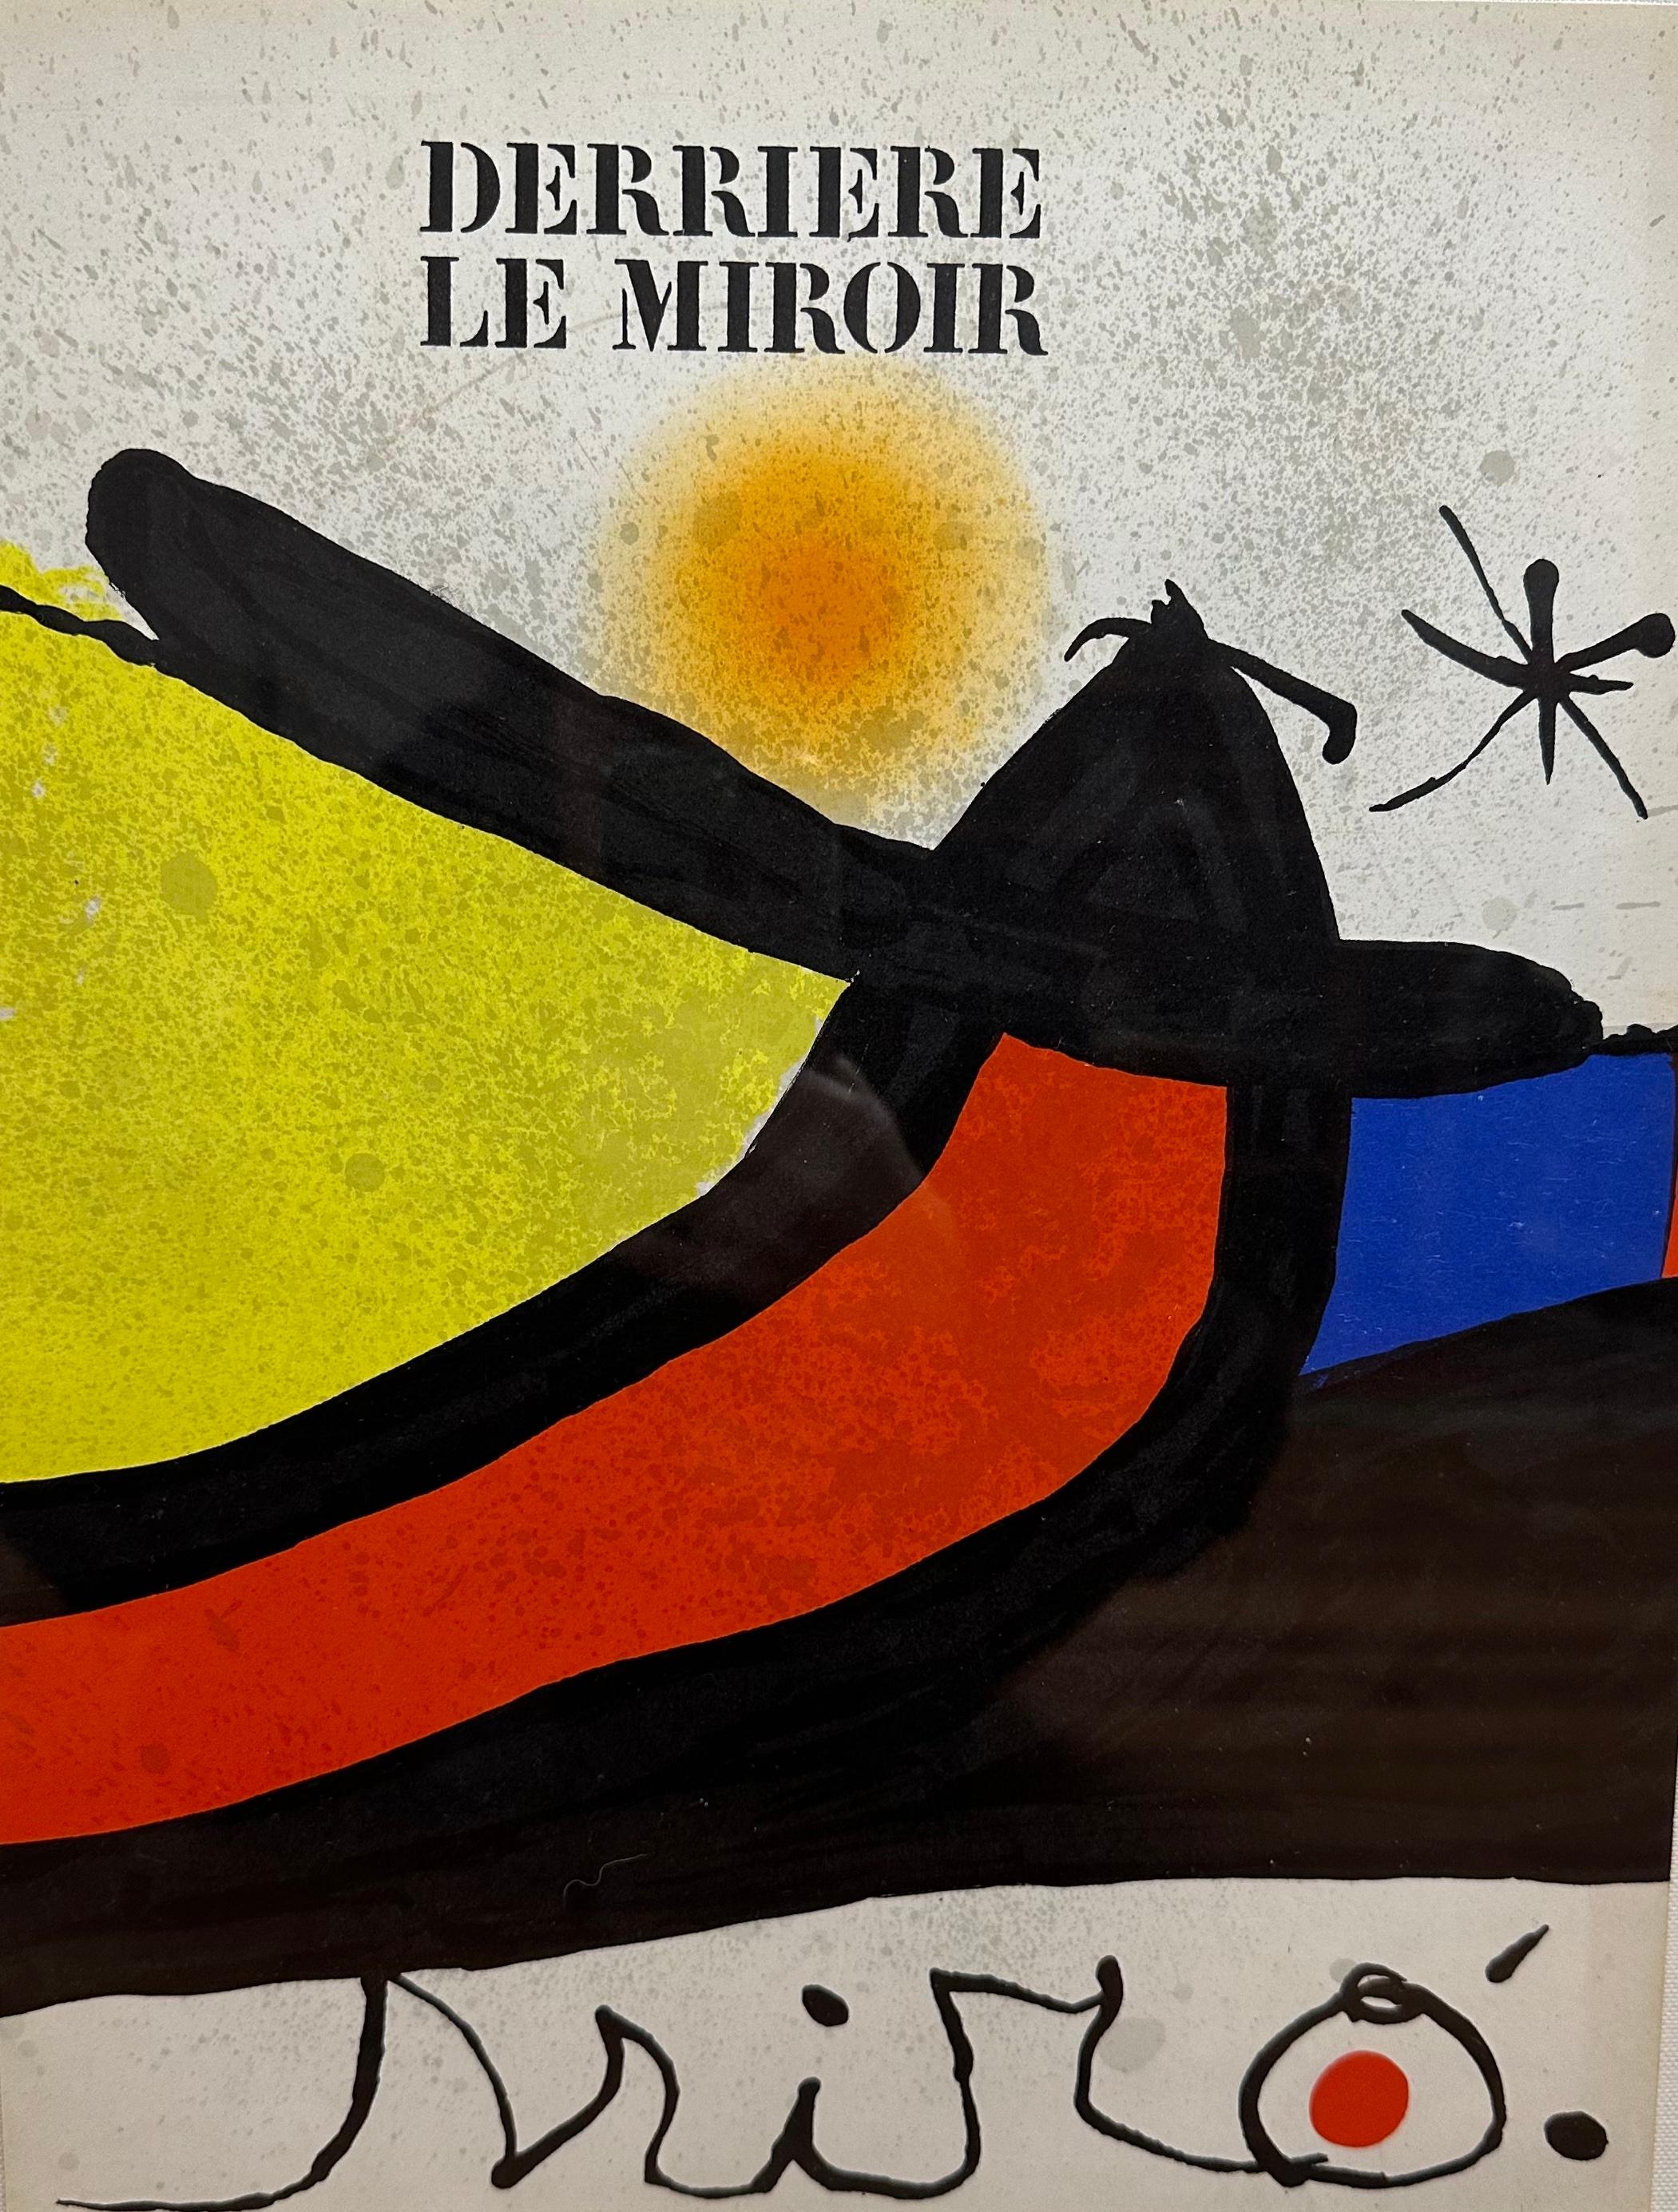 Joan Miró
Derriere le Miroir
Original color lithograph
1971
Published by Maeght Editeur, Paris
Hand signed and dedicated on the verso in pencil
Custom framed to museum standards
Image Size: 14 x 11 inches
Frame Size: 26.5 x 24 inches